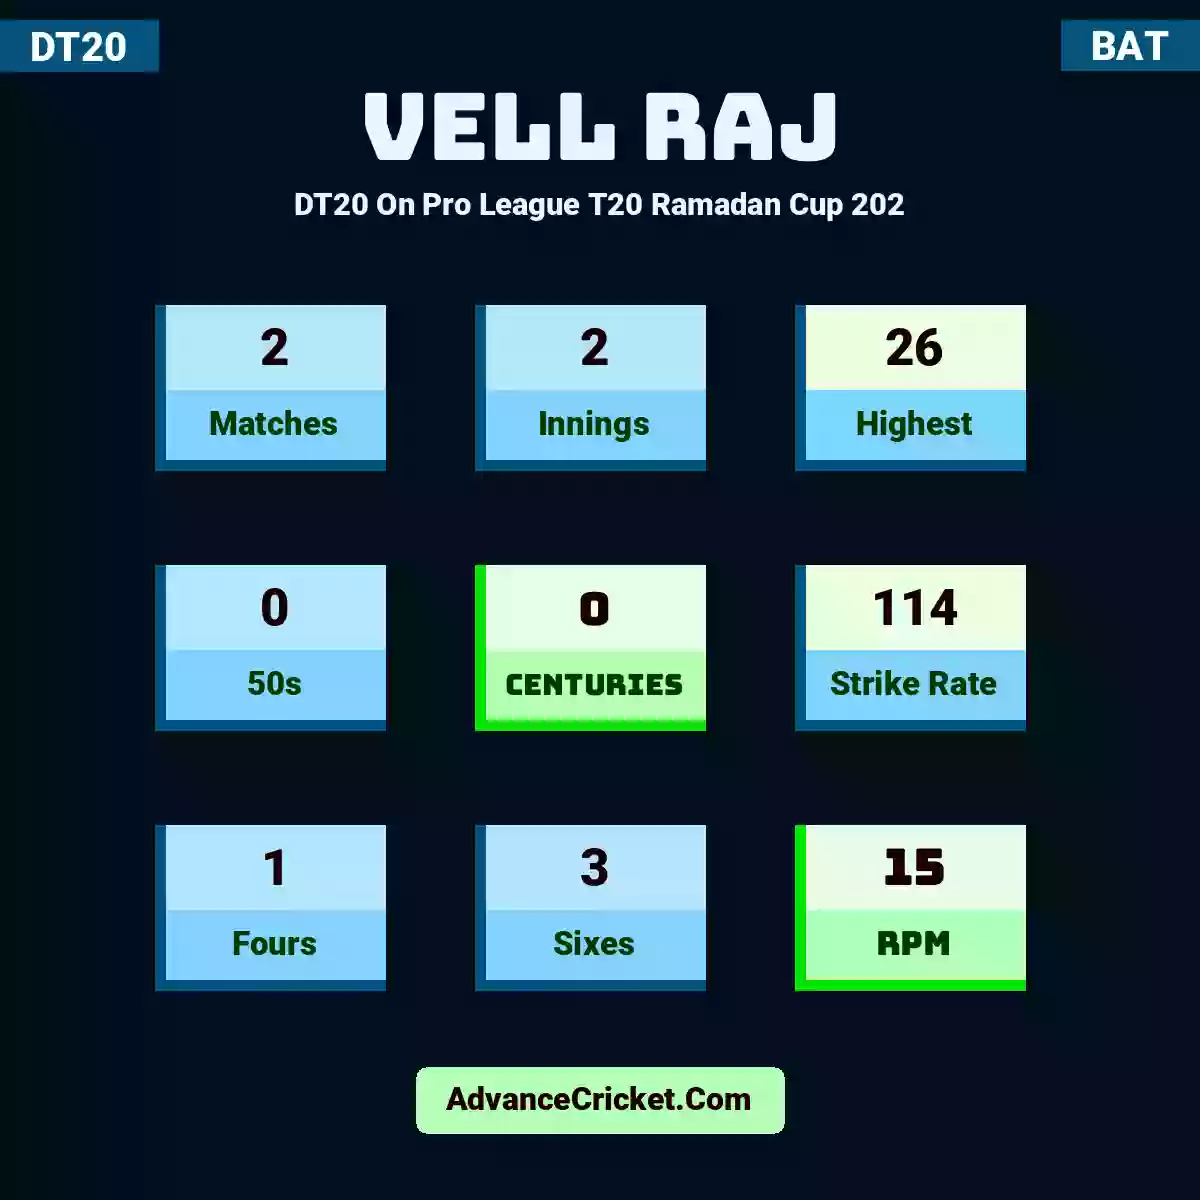 Vell raj DT20  On Pro League T20 Ramadan Cup 202, Vell raj played 2 matches, scored 26 runs as highest, 0 half-centuries, and 0 centuries, with a strike rate of 114. V.raj hit 1 fours and 3 sixes, with an RPM of 15.